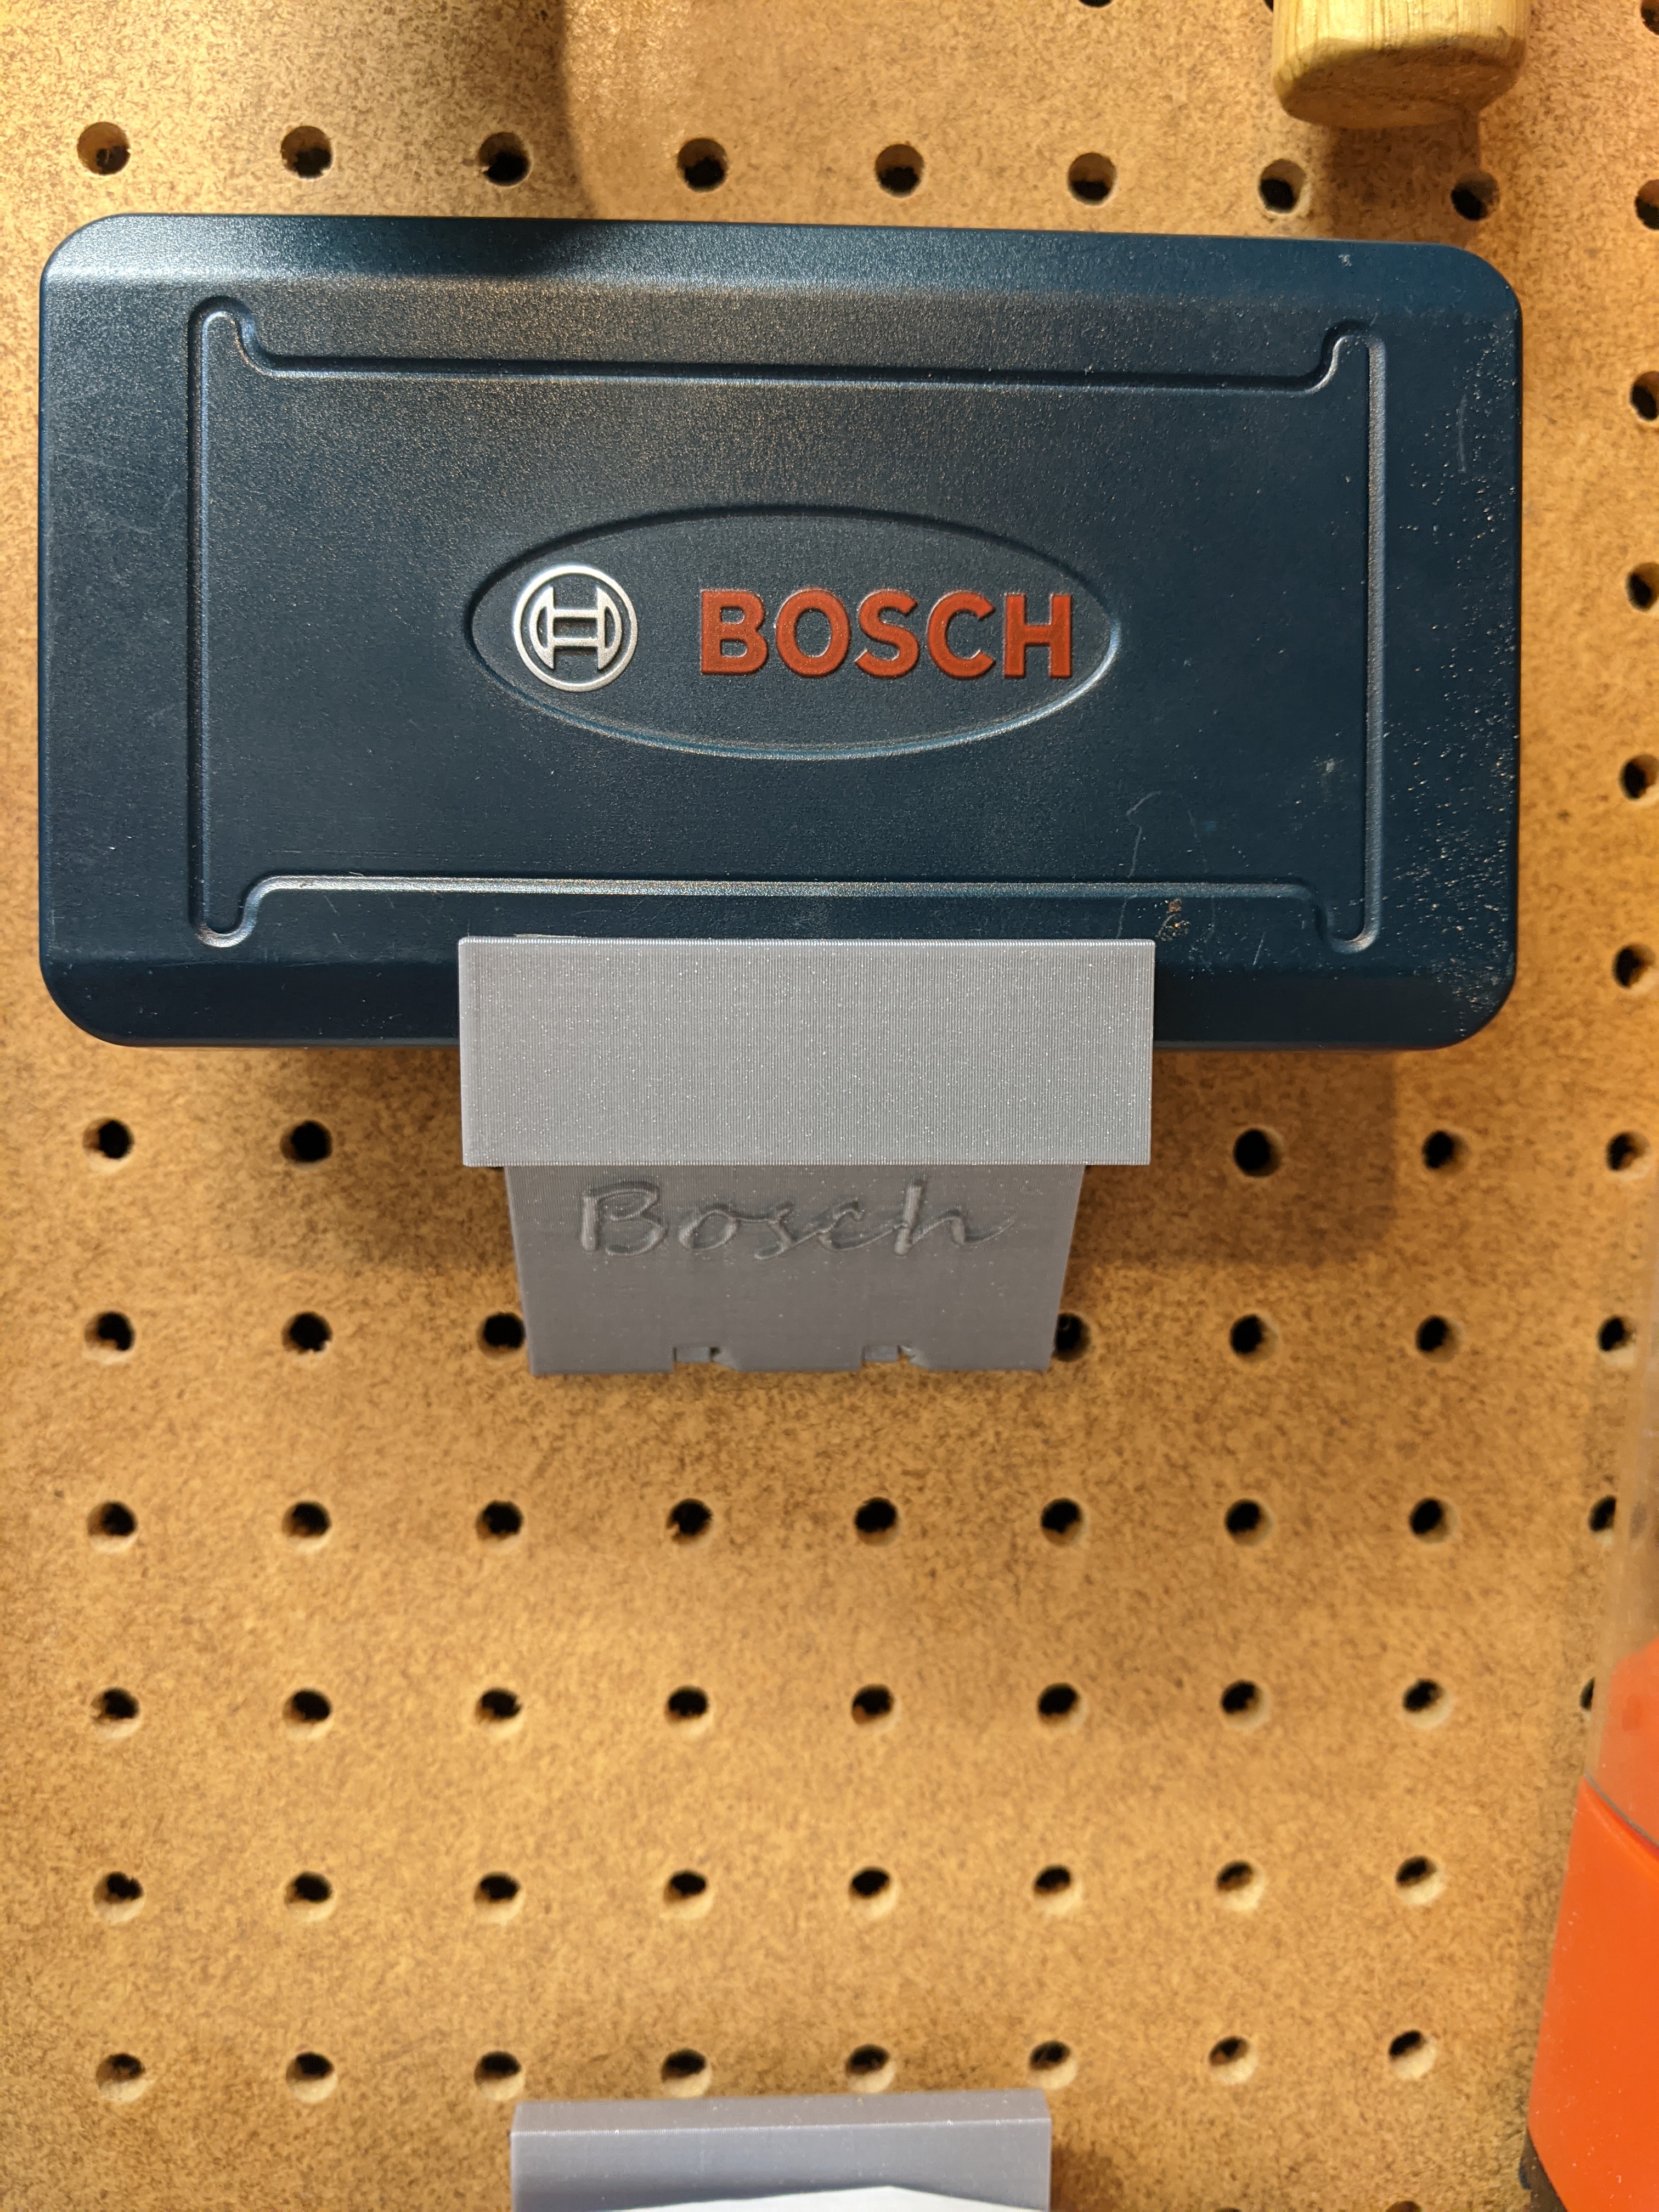 Pegboard holder for Bosch Tool Index